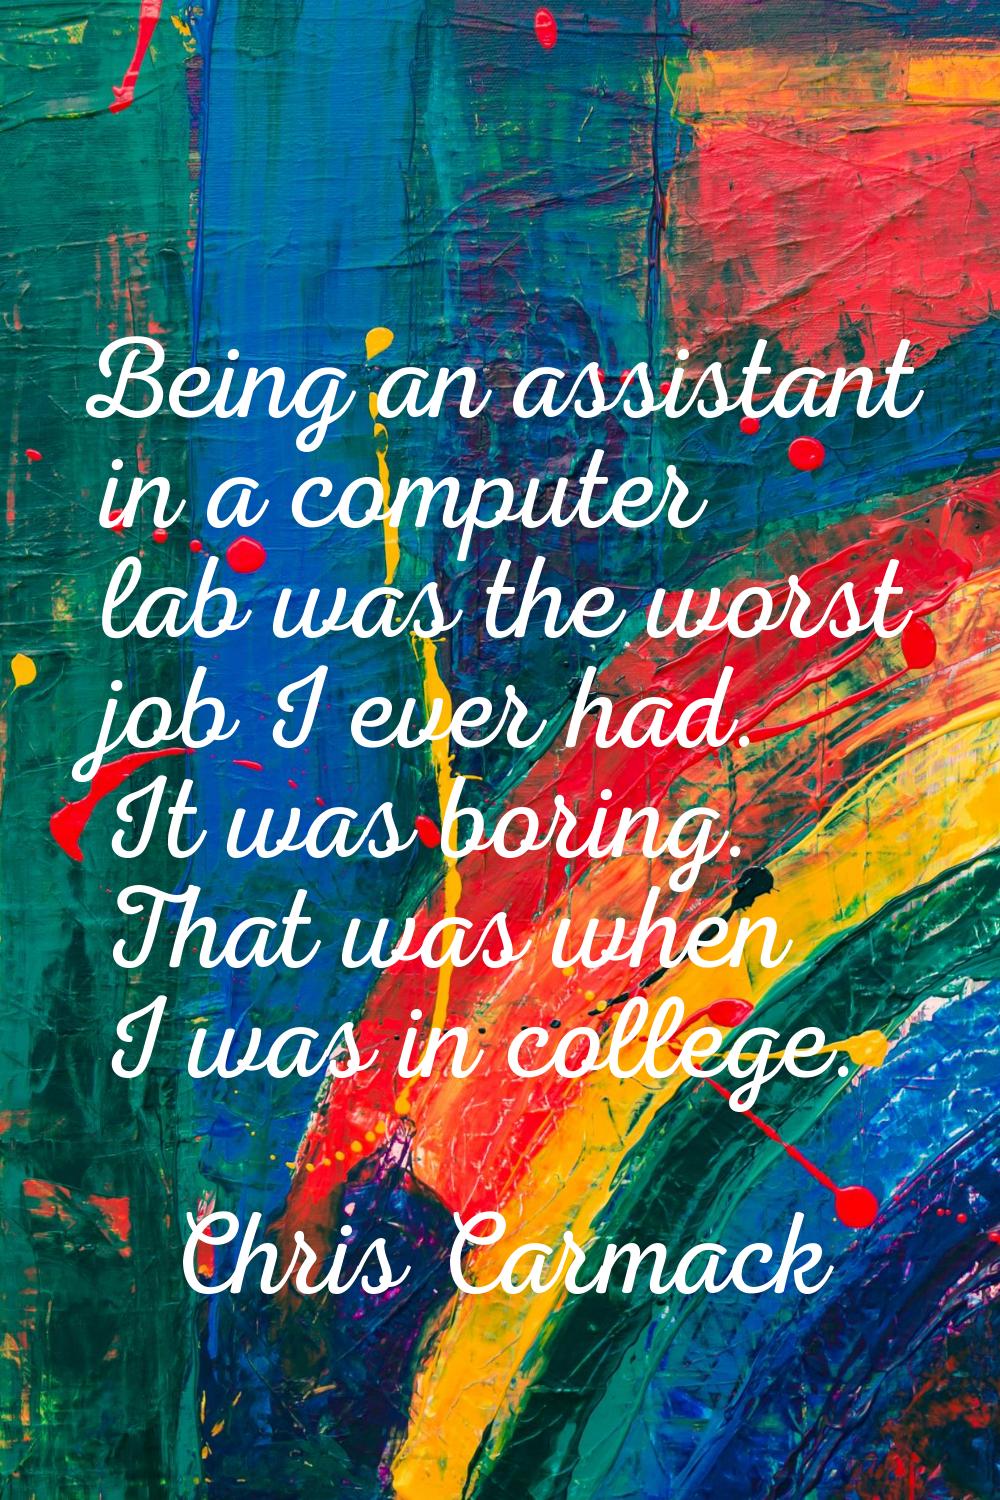 Being an assistant in a computer lab was the worst job I ever had. It was boring. That was when I w